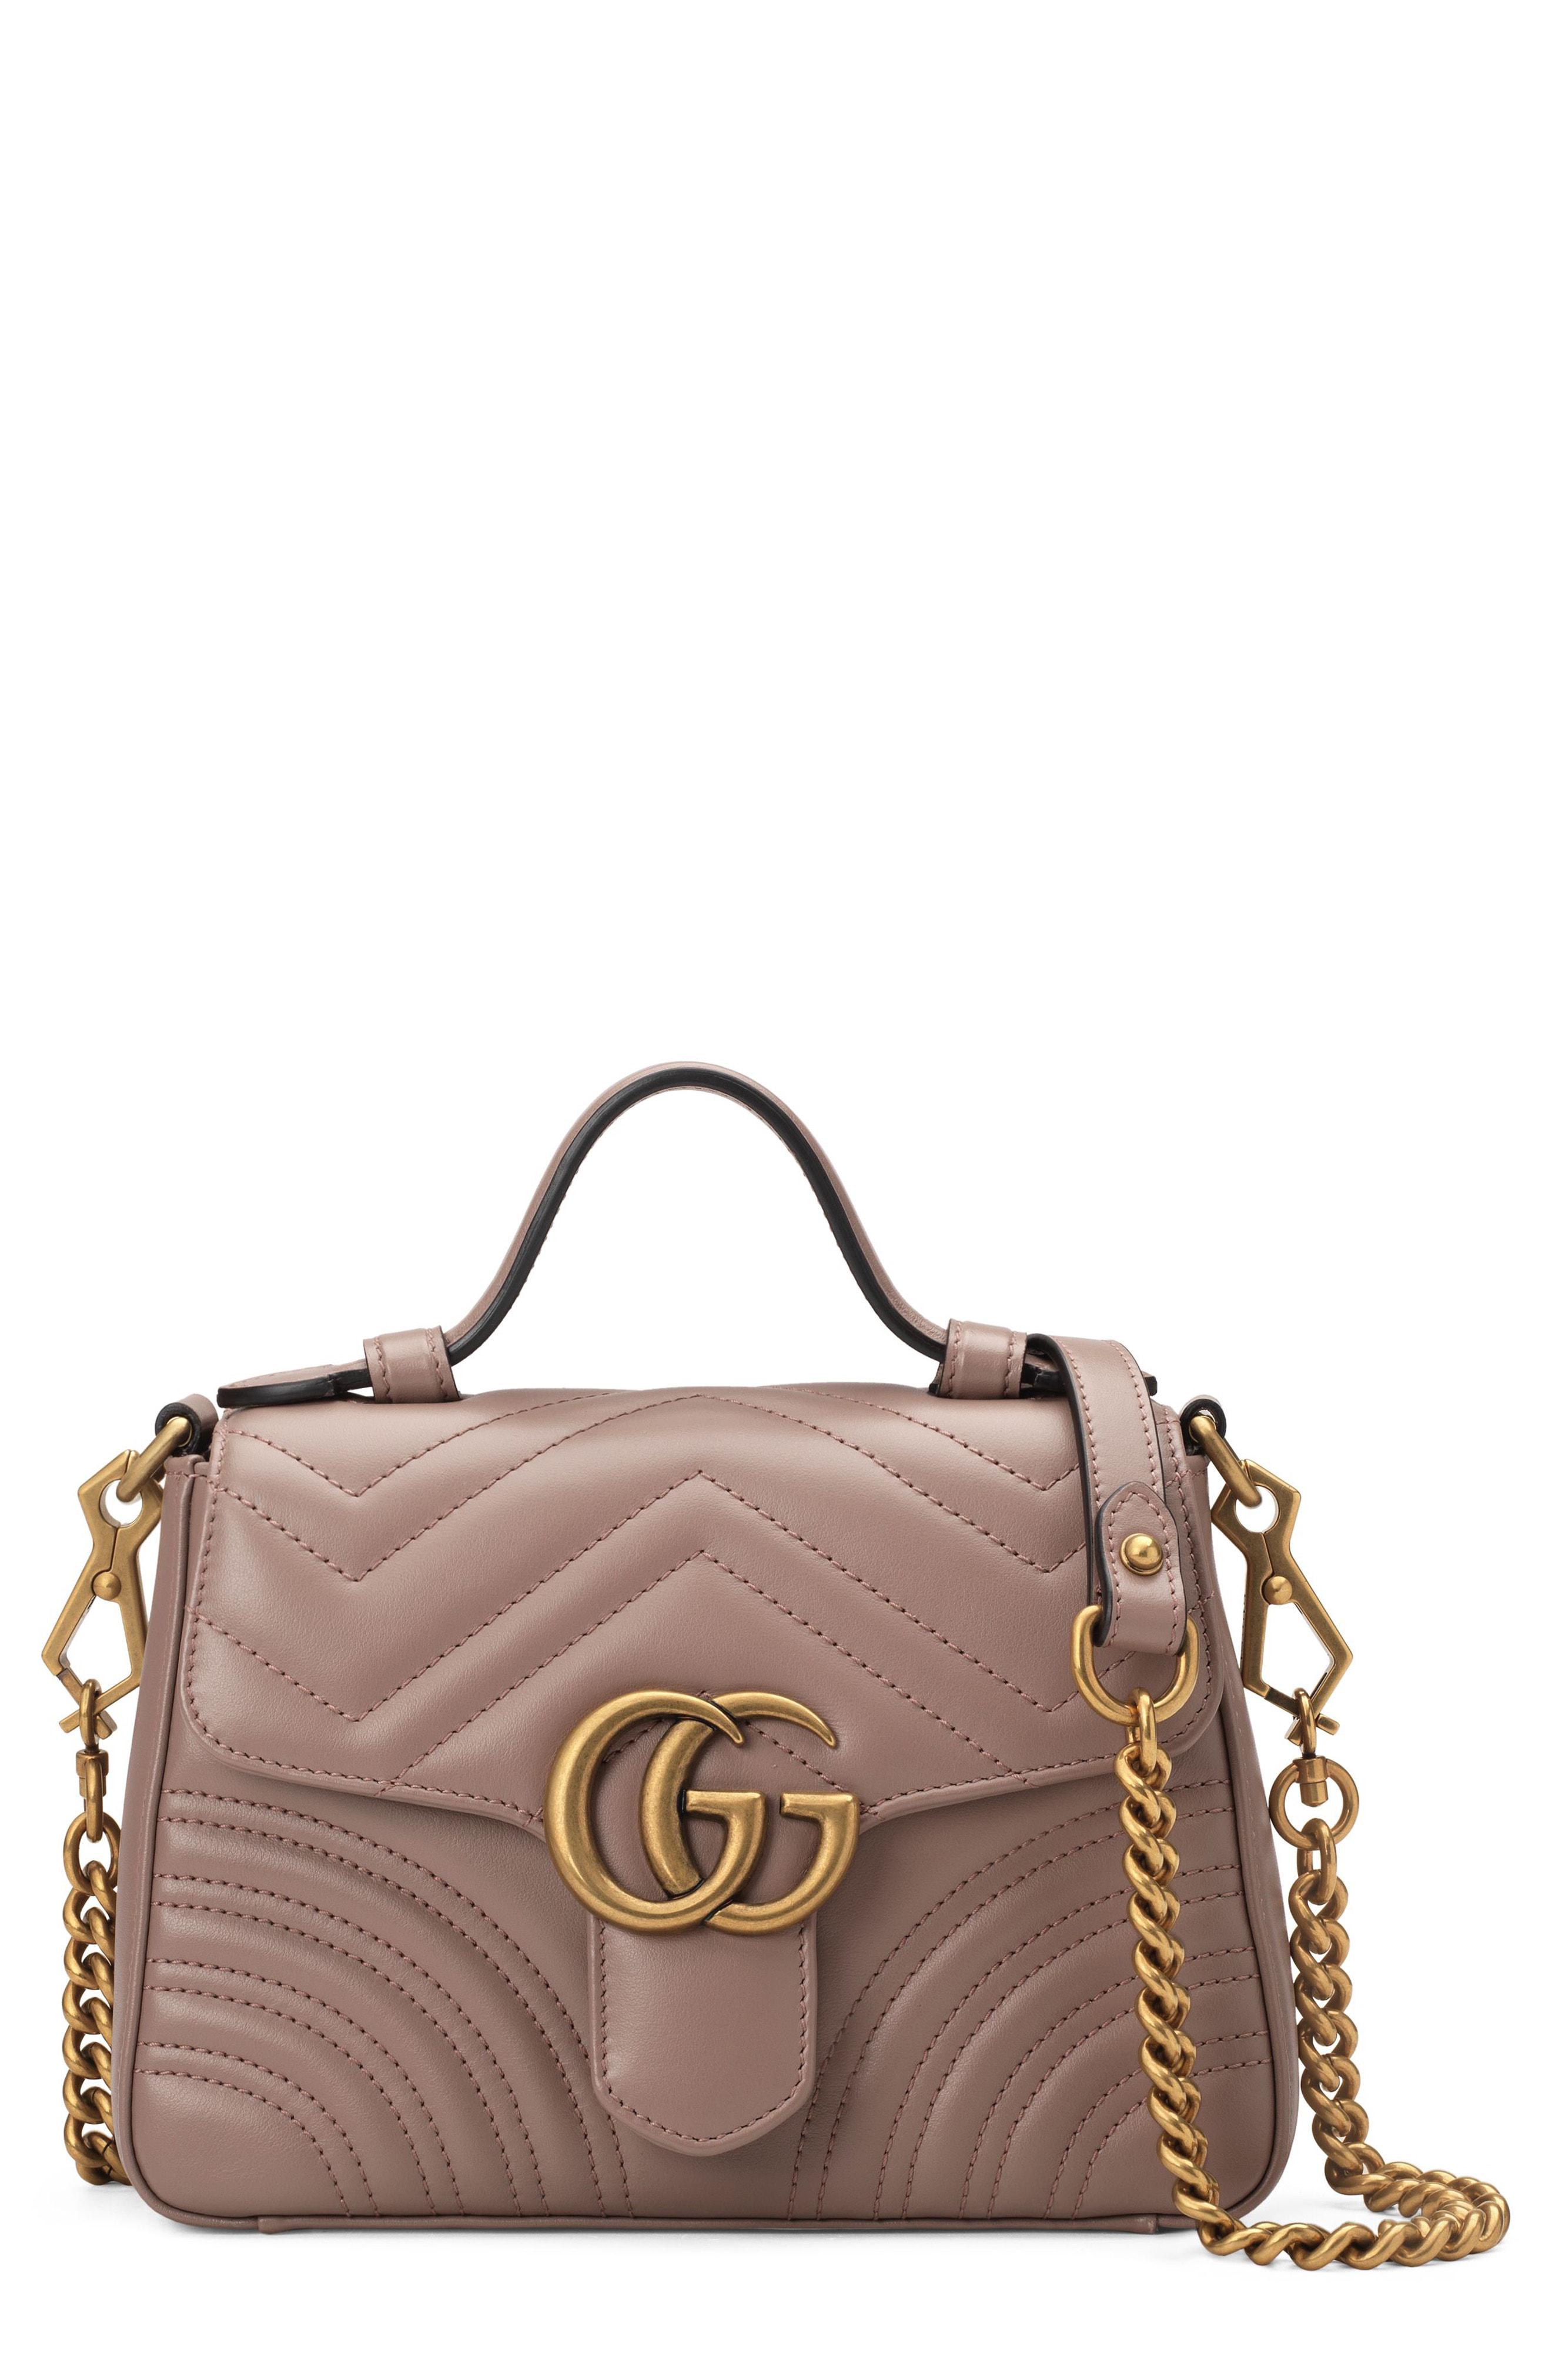 Lyst - Gucci Marmont 2.0 Leather Top Handle Bag - Save 31%